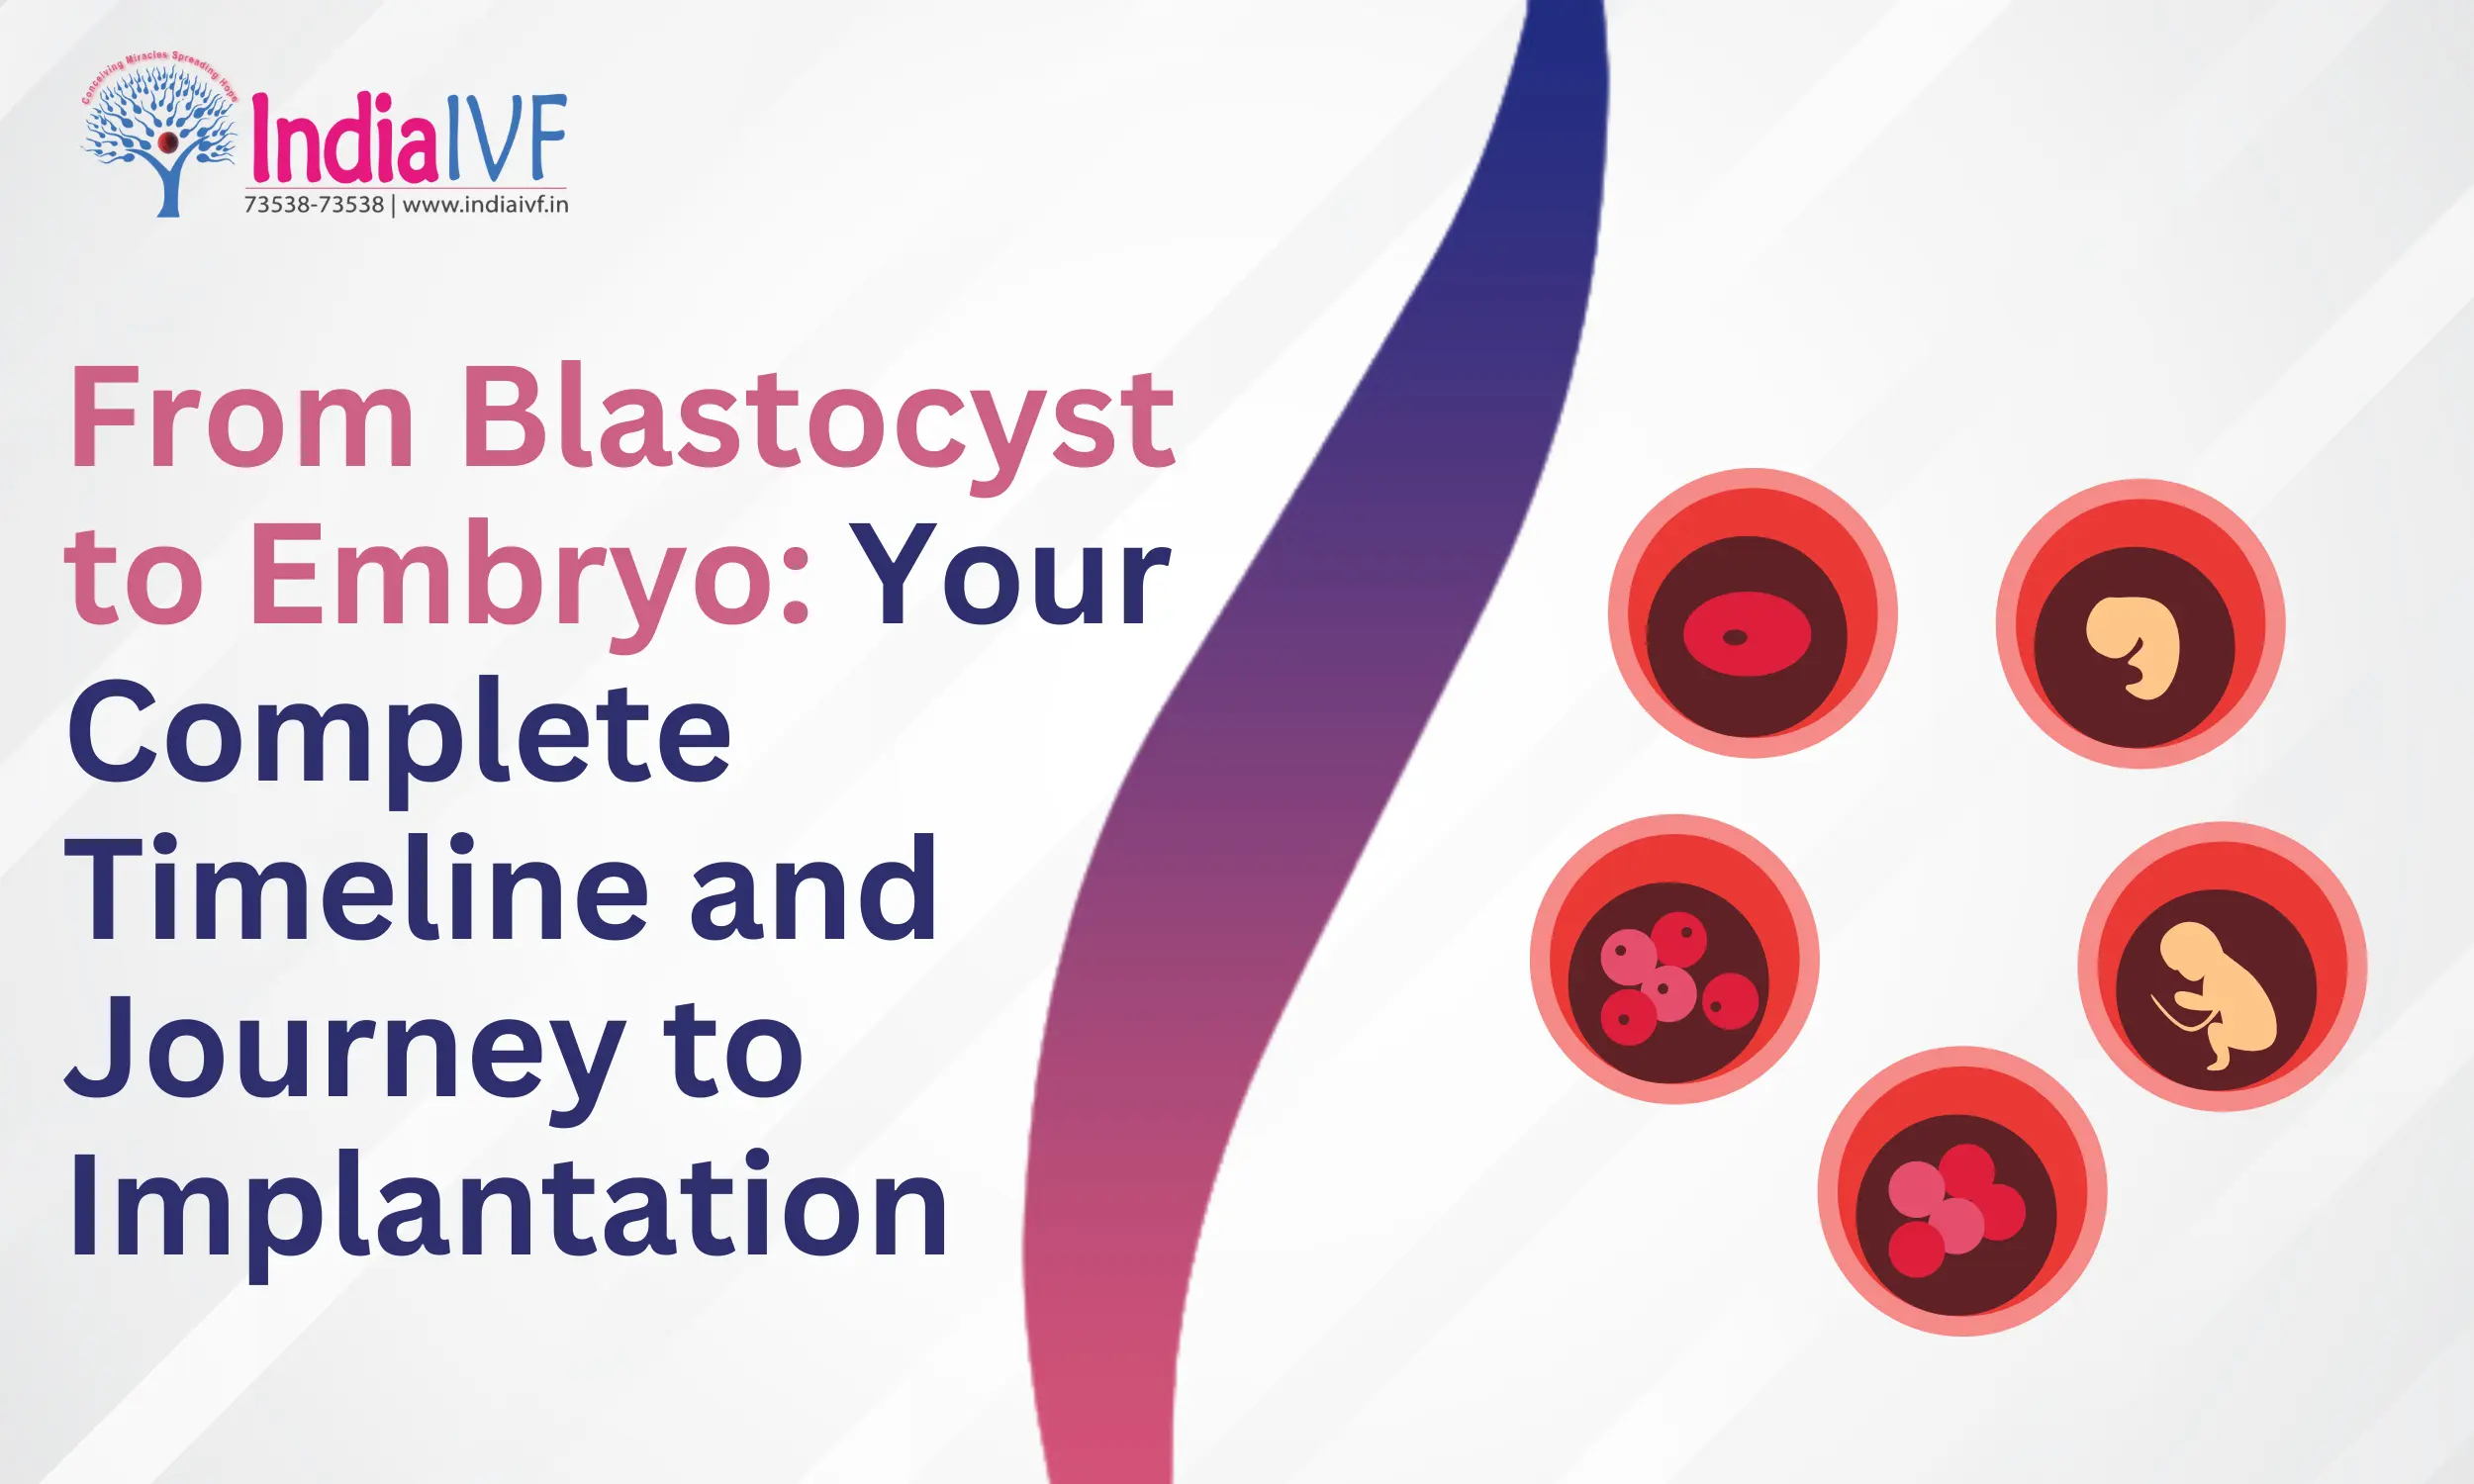 From Blastocyst to Embryo: Your Complete Timeline and Journey to Implantation